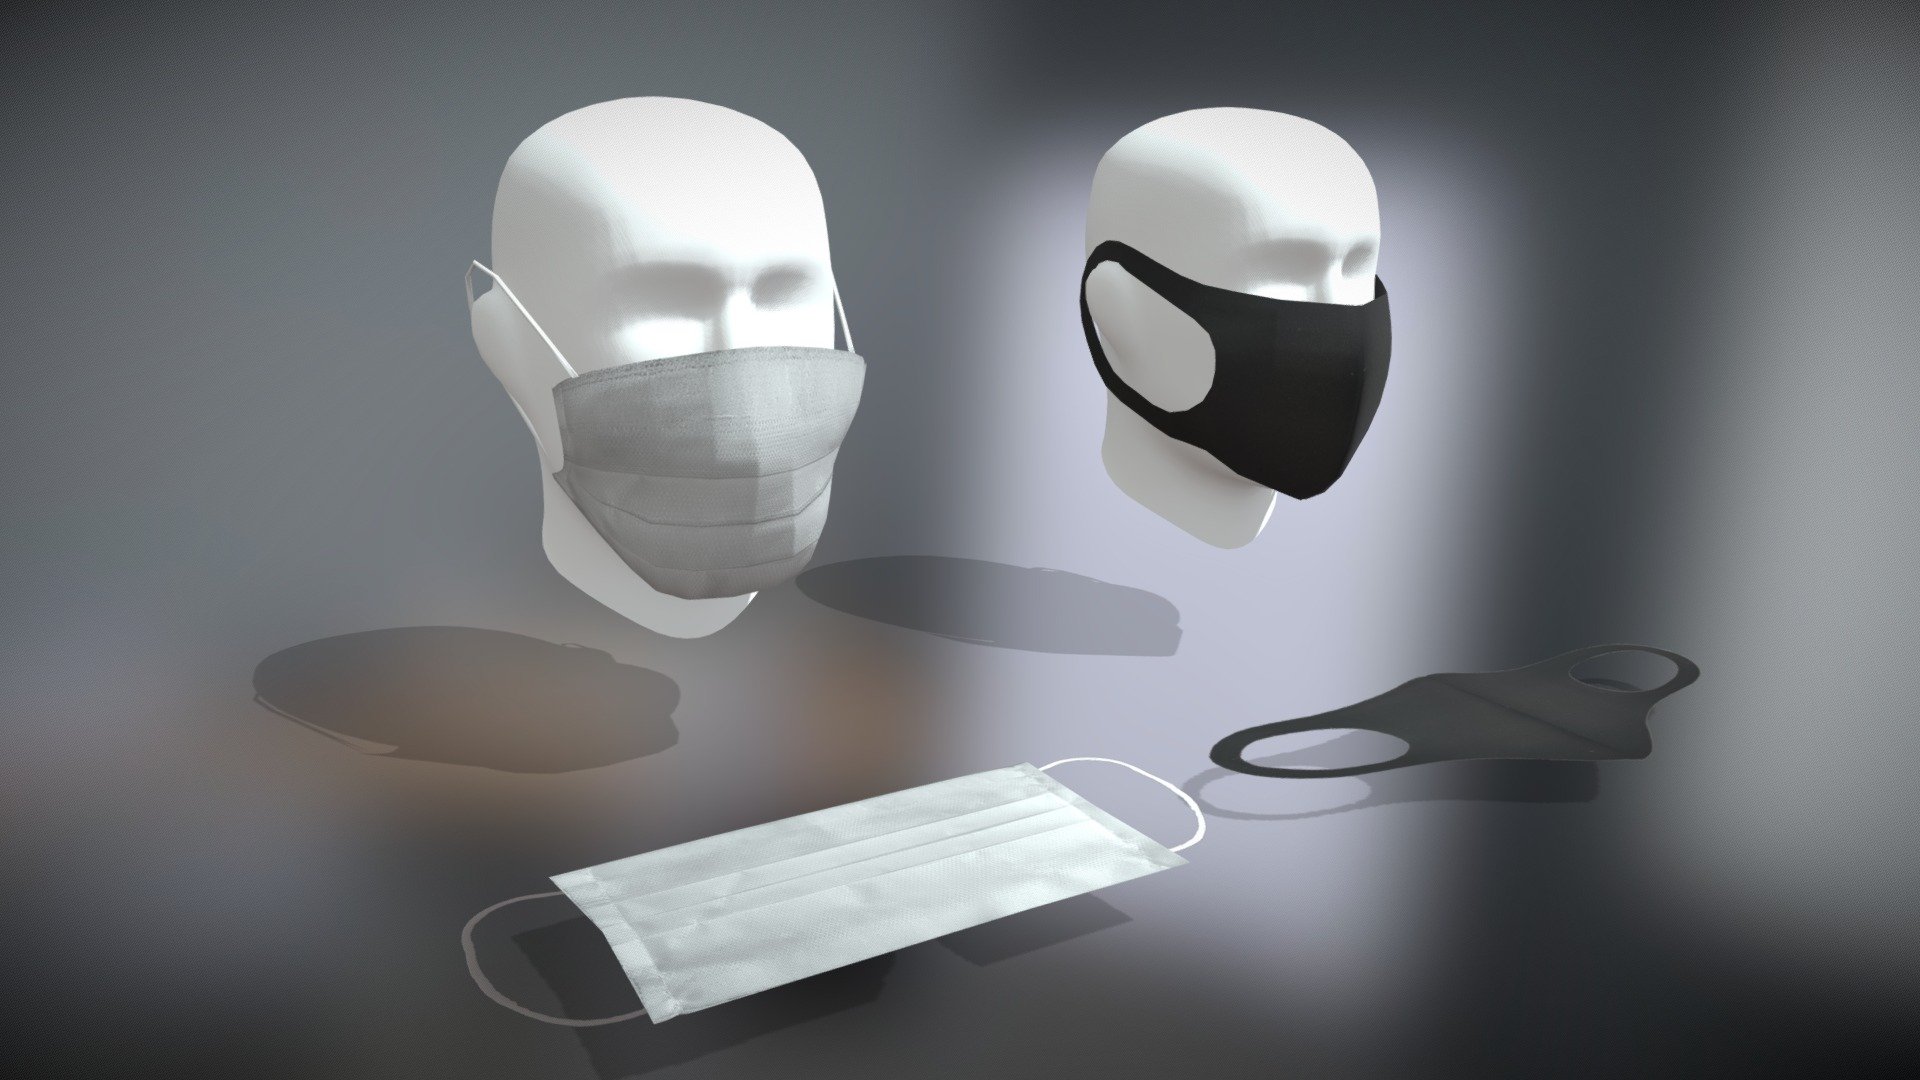 It's been a while since the Covid-19 spread the world and we got used to live with it. I decided to share two of my scrapped mask models for a project. I exported the medical mask as a group so you can change the rotation of the cords. The ones on the bottom meant as a pickup items 3d model